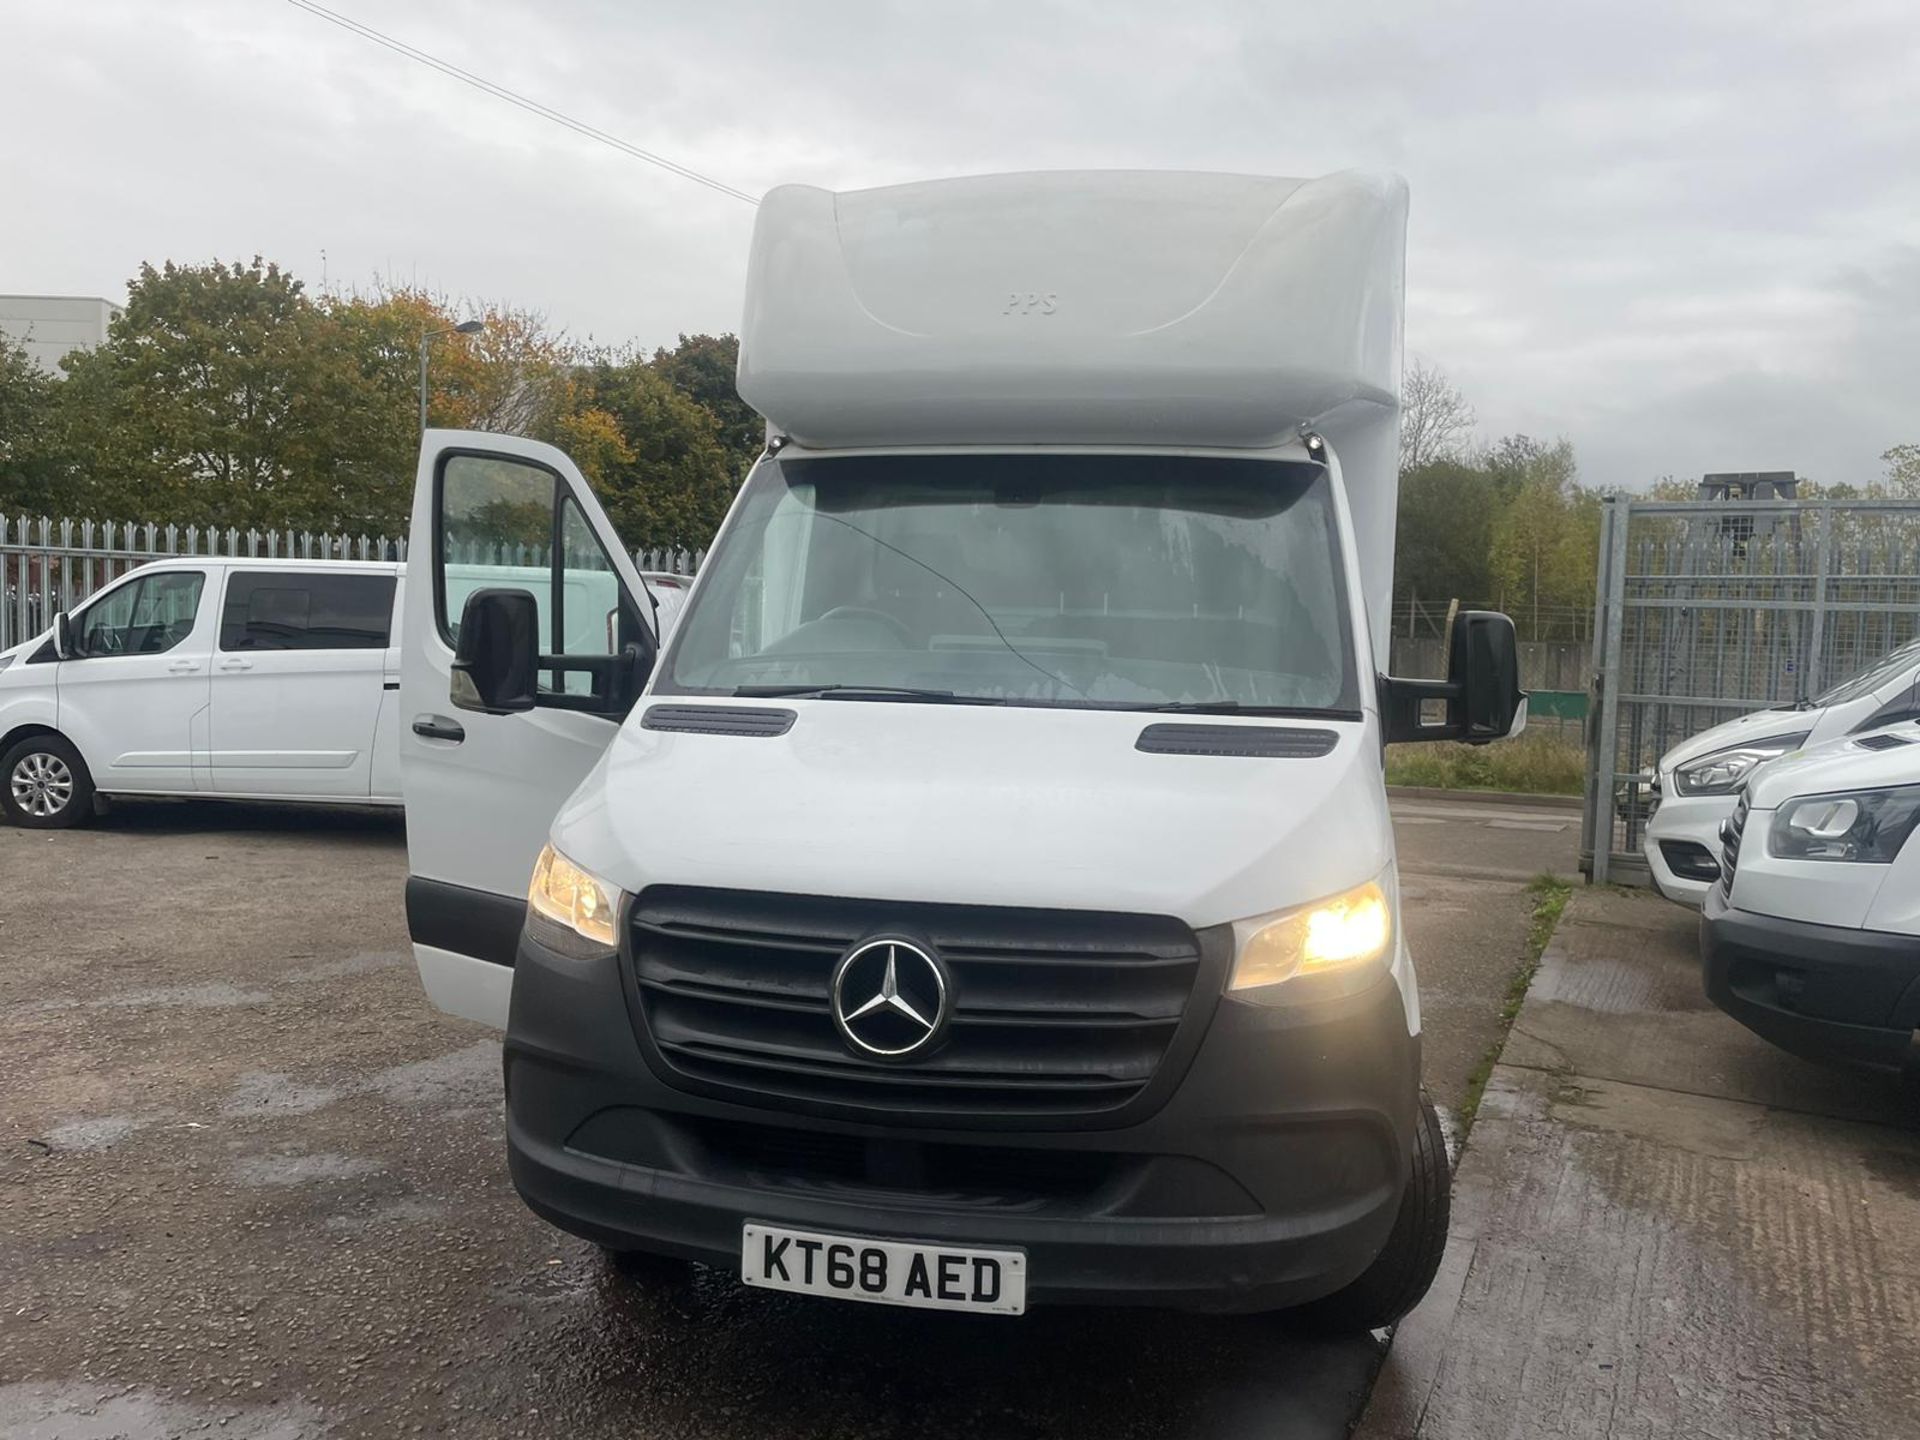 2018 MERCEDES SPRINTER 314 CDTI LUTON WITH TAIL LIFT - 108,356 WARRANTED MILES - 2.2 EURO 6 ENGINE, - Image 2 of 10